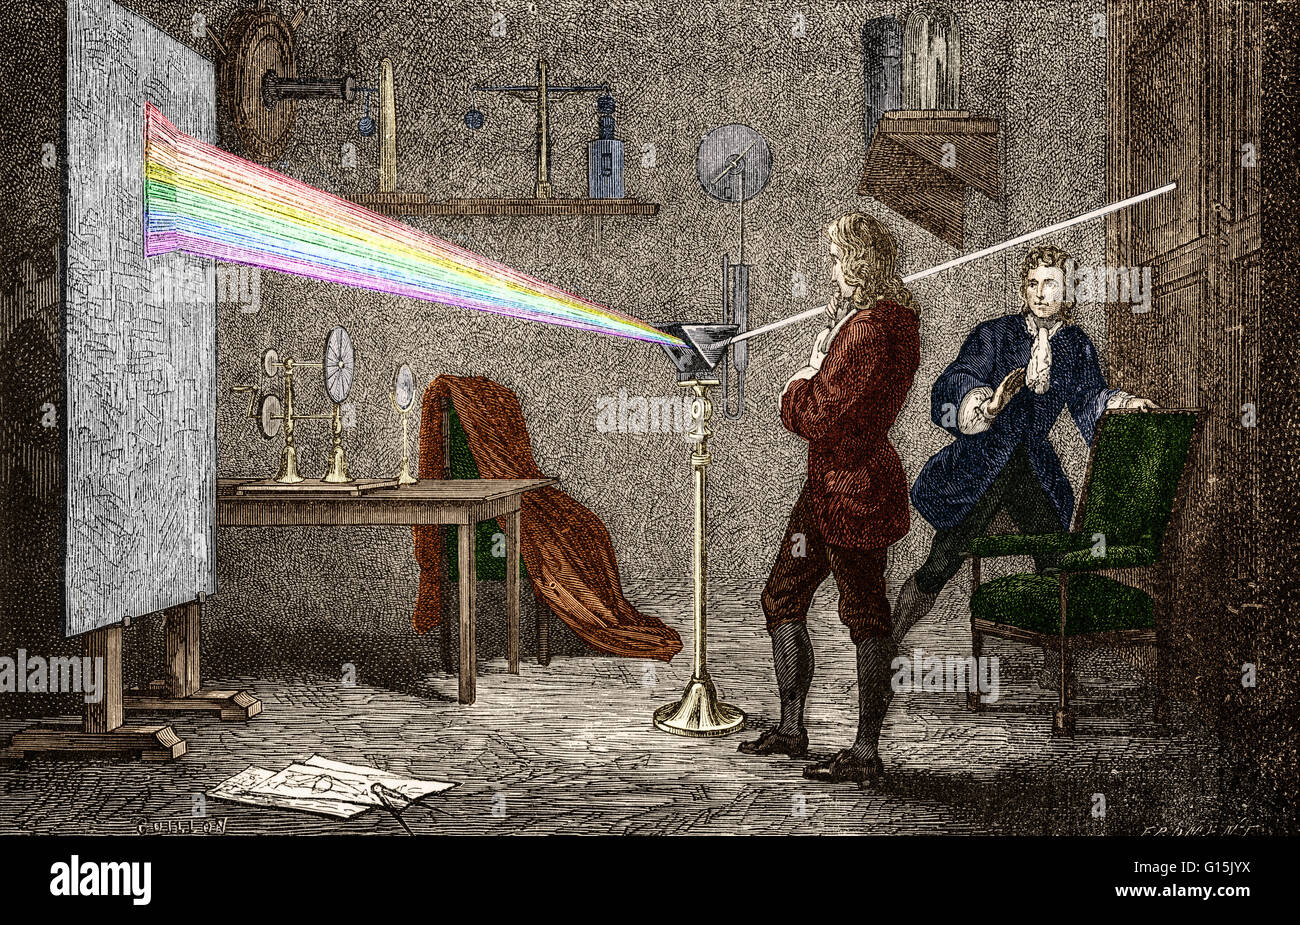 isaac newton inventions in physics